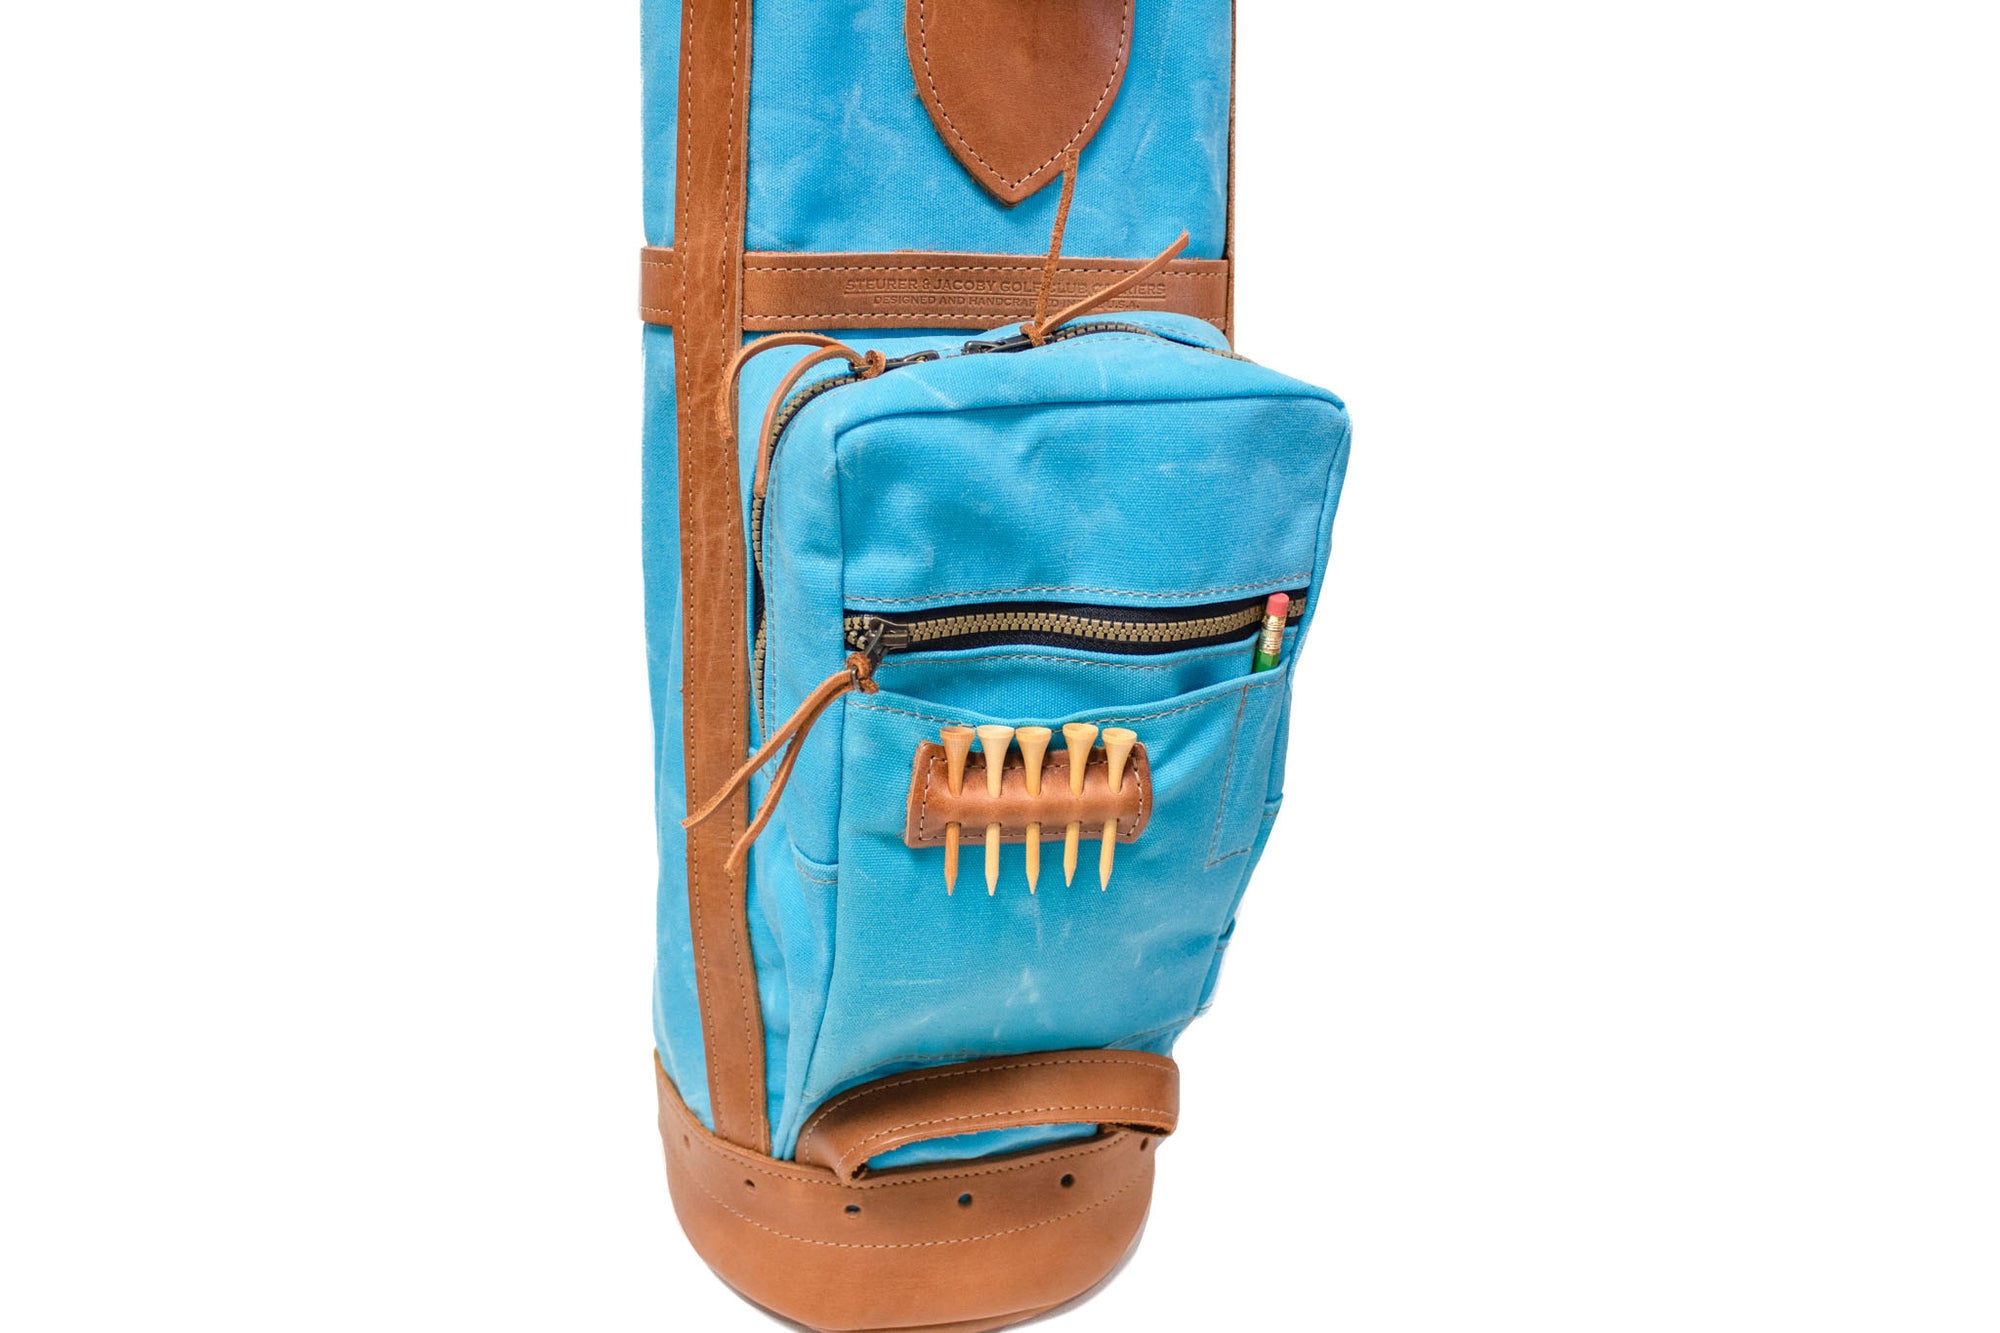  Light Blue with Natural Leather Sunday Style Golf Bag Ball Pocket- Steurer & Jacoby